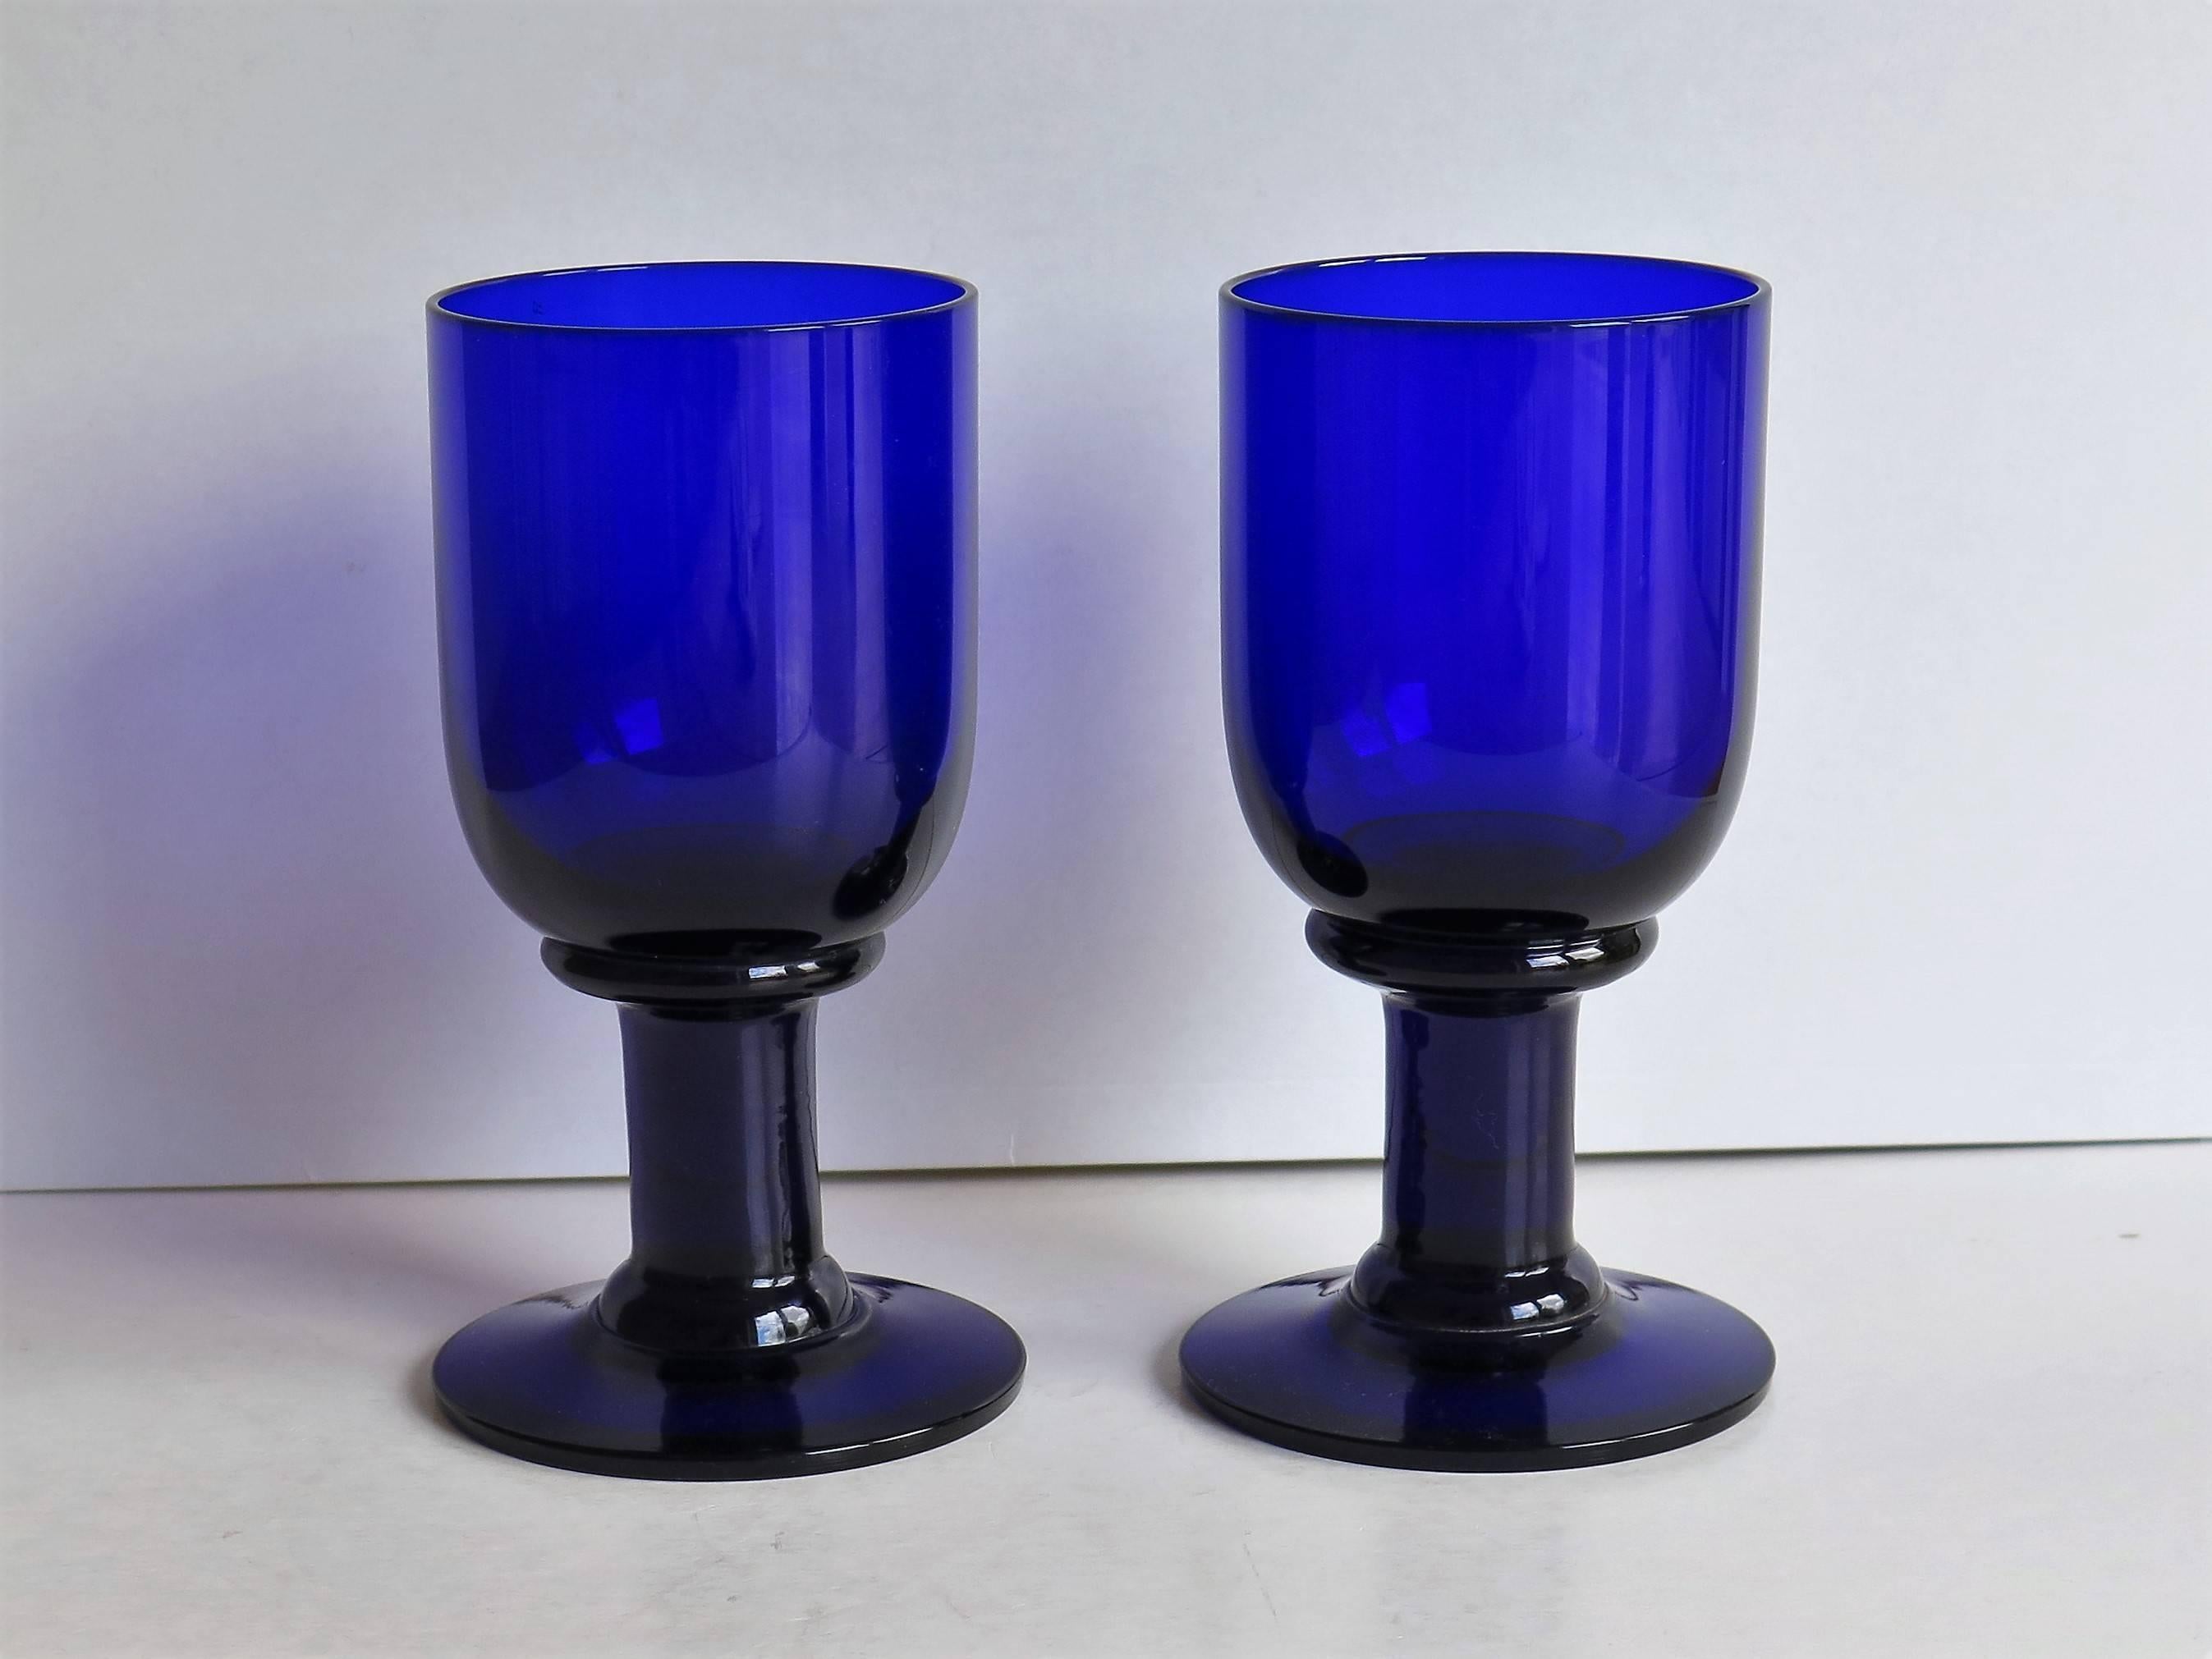 This is a good pair of English wine drinking glass goblets or Rummers from the late-19th century.

The glass is a deep Bristol Blue color. Colored glass was fashionable from the end of the 18th century and popular through the 19th century, the blue